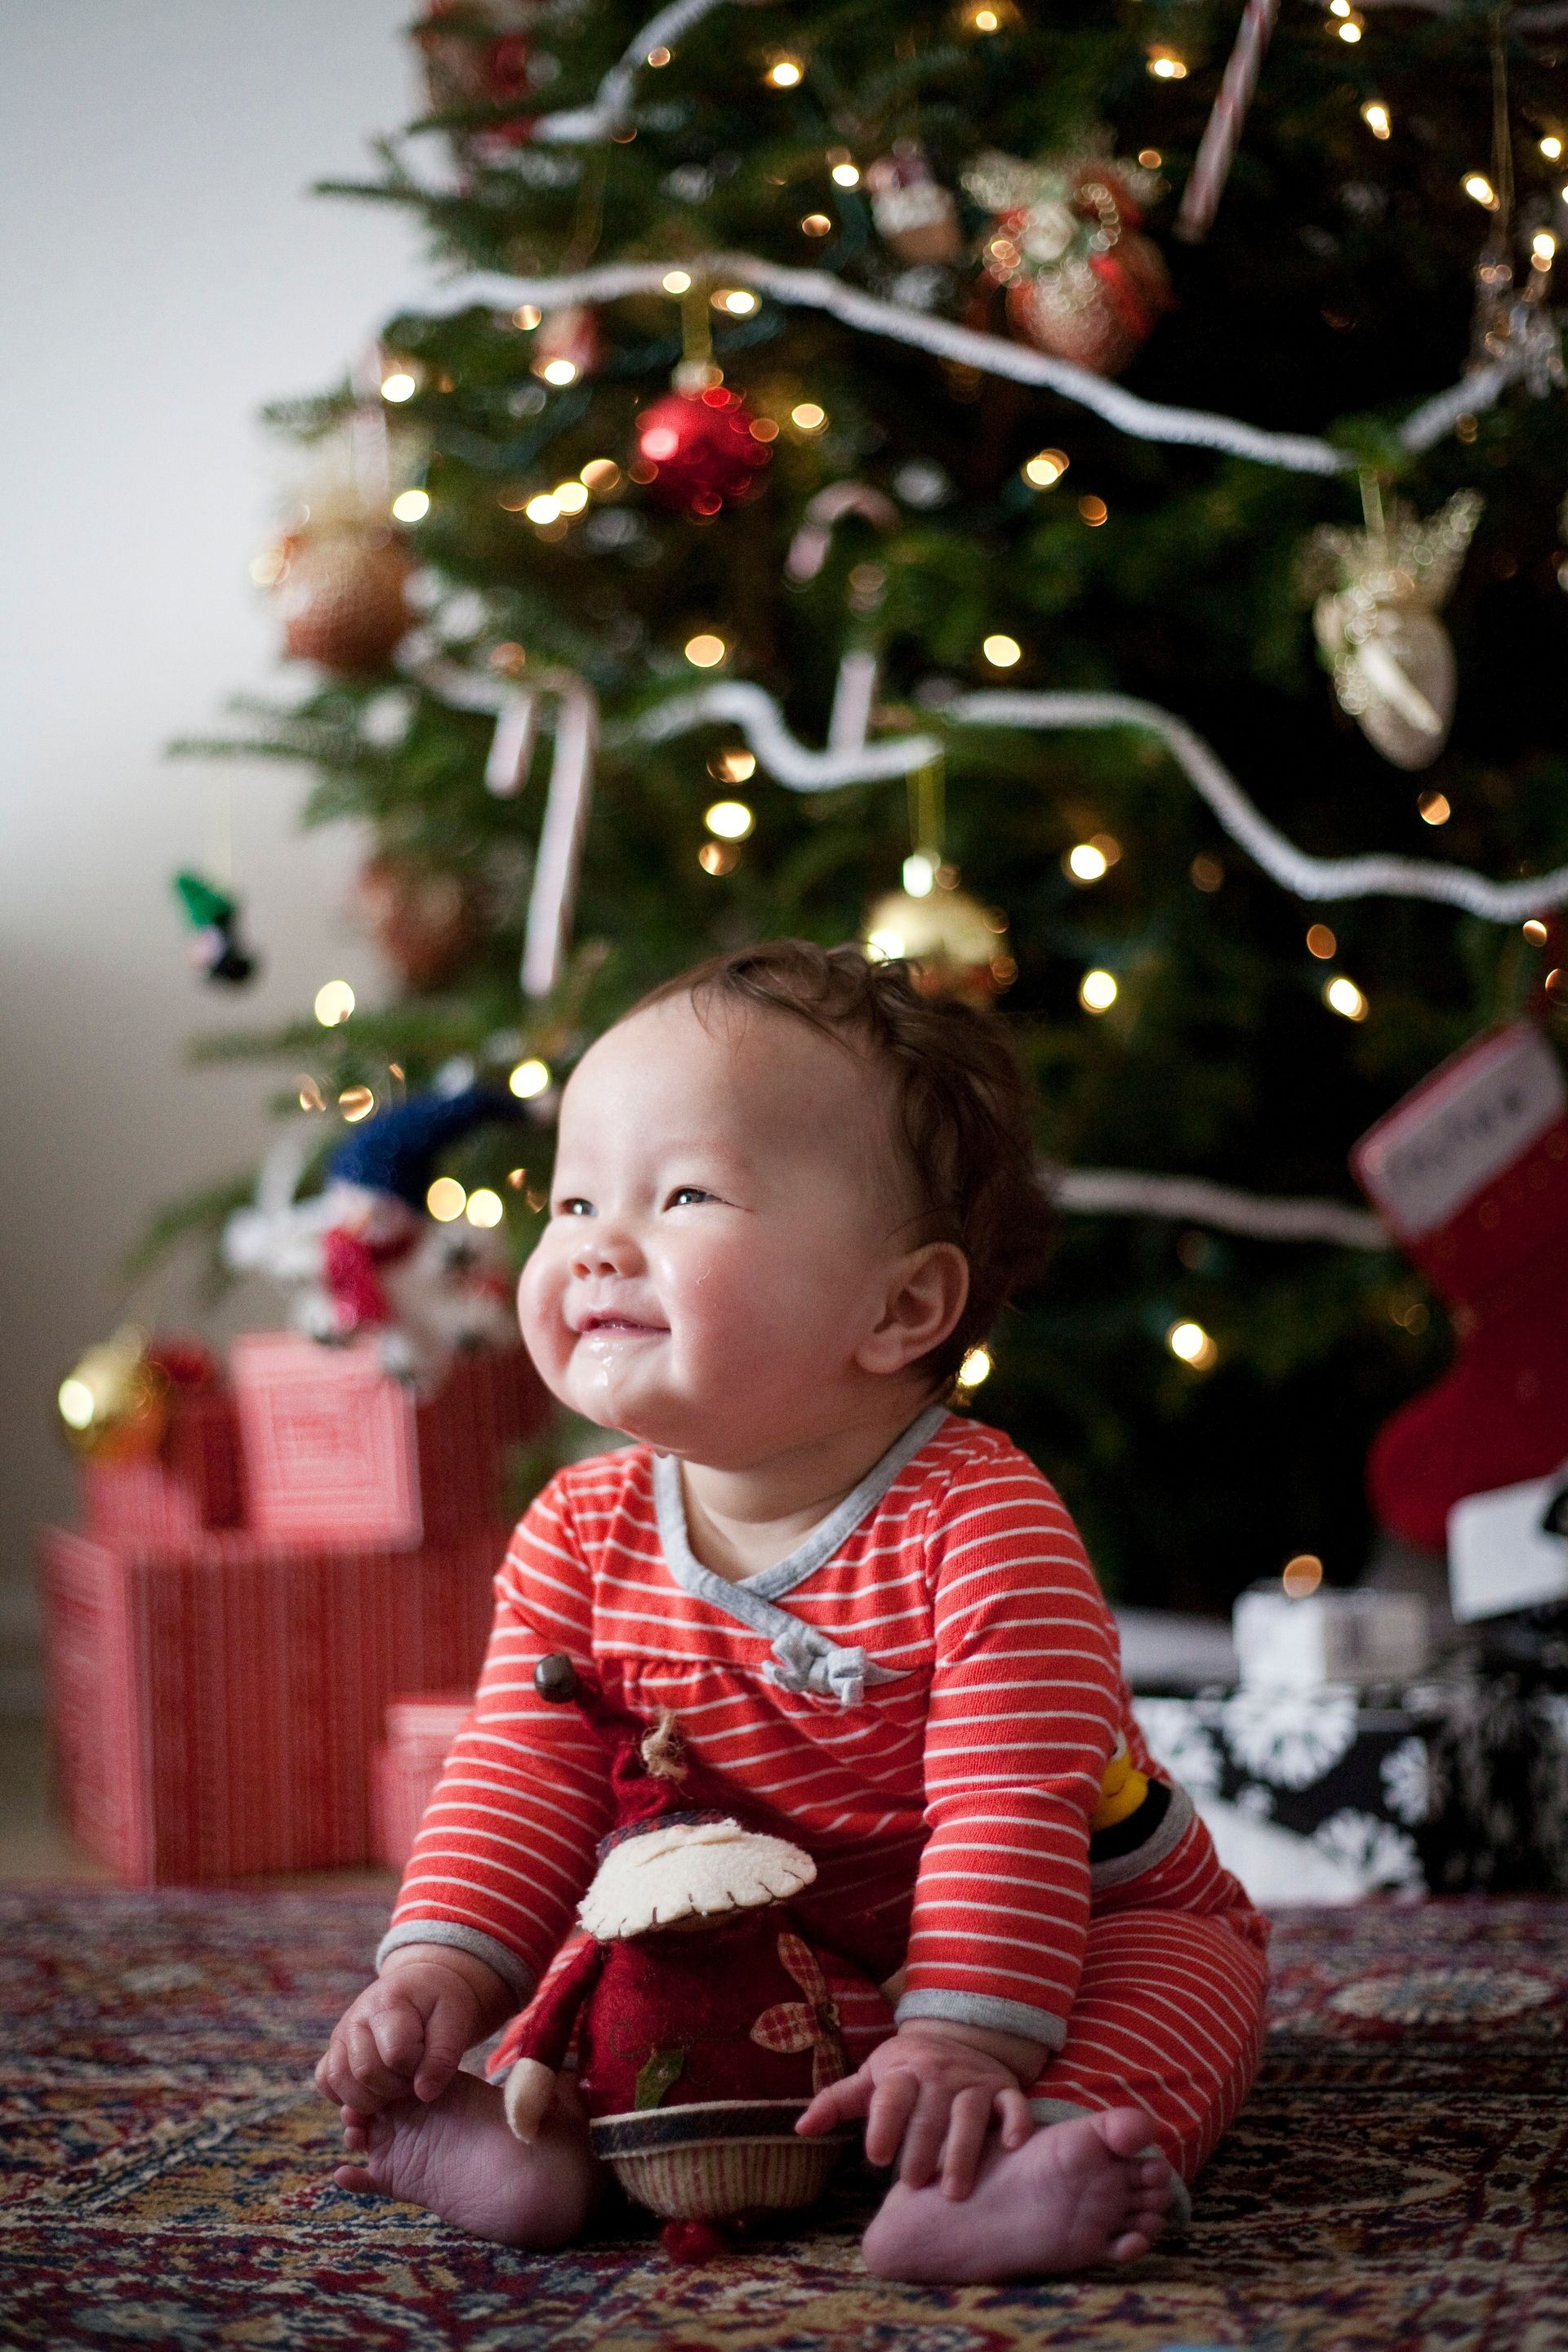 A baby sitting near the Christmas tree on Christmas morning.